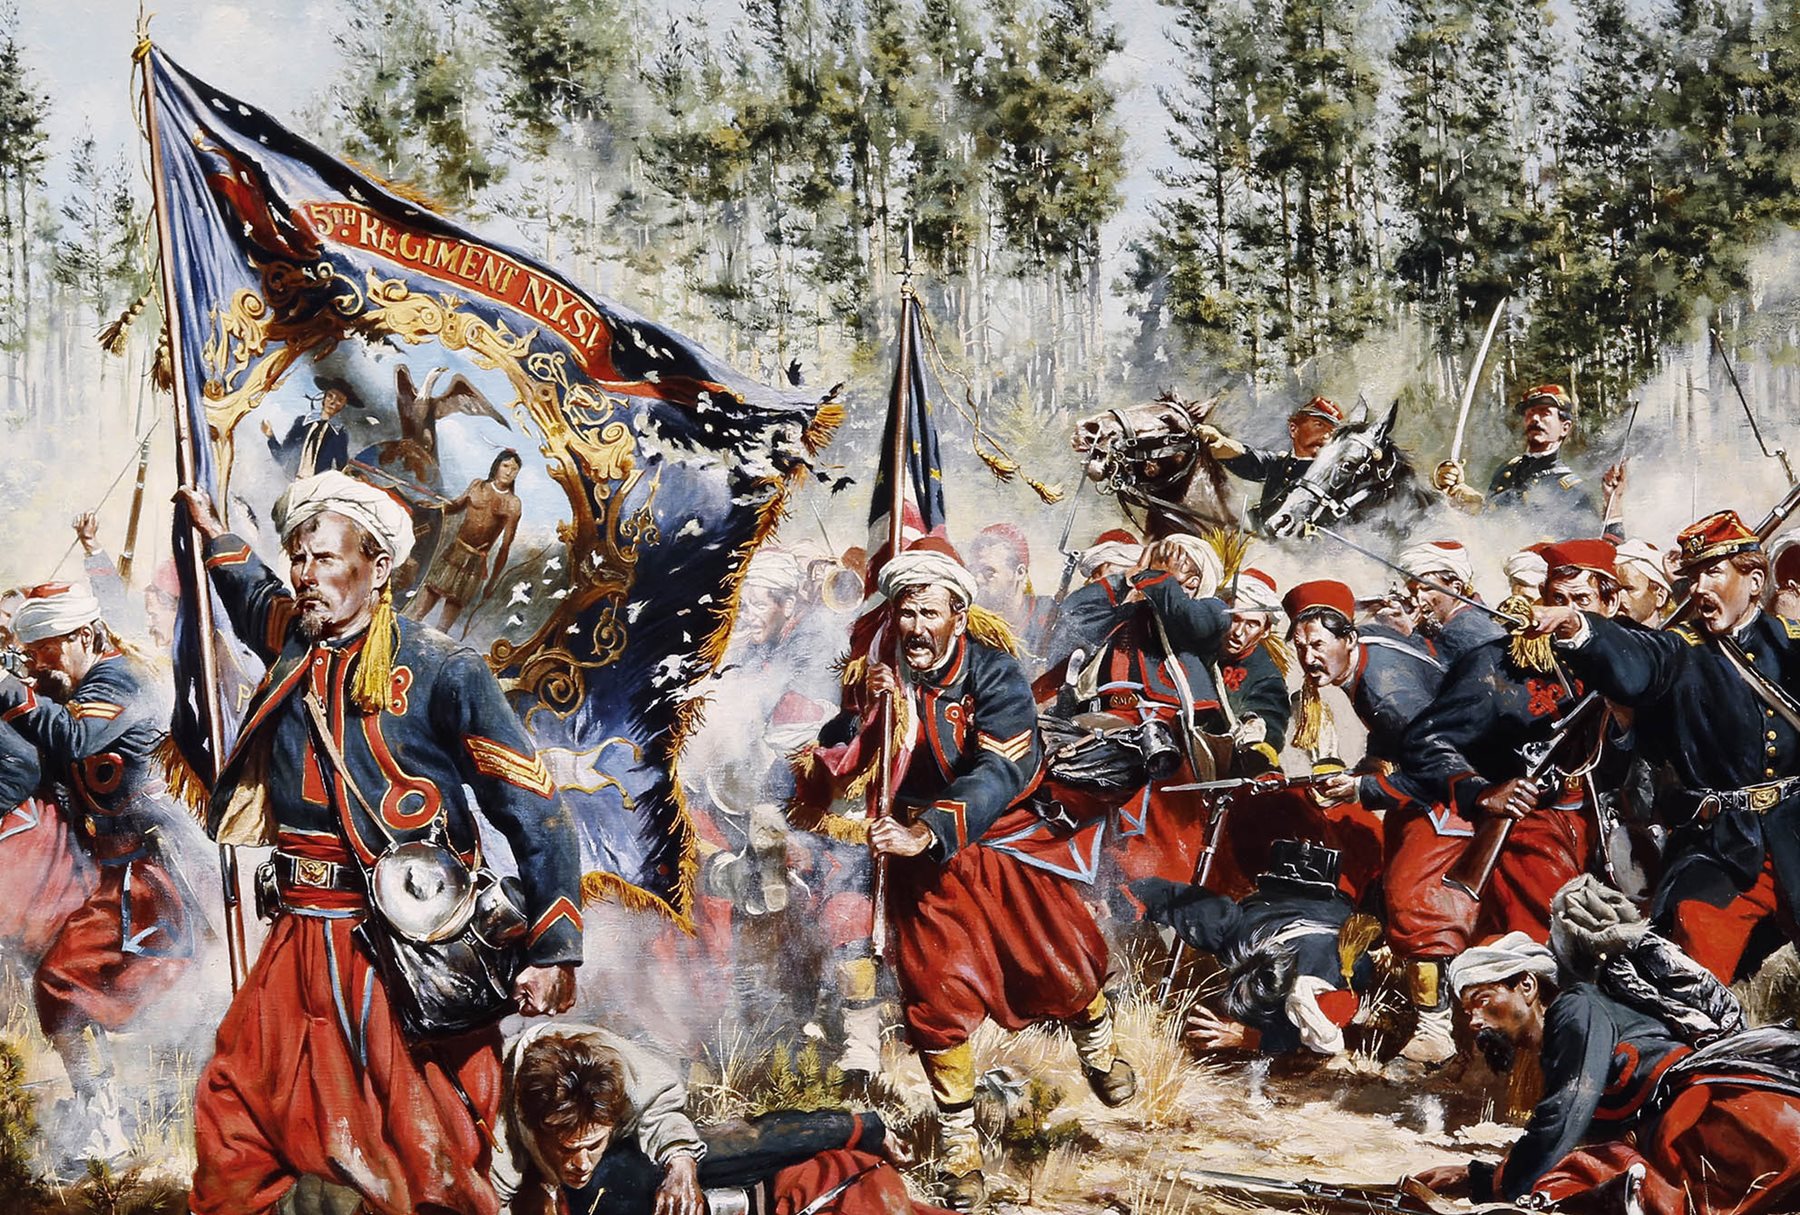 This painting shows Duryee&rsquo;s Zouaves, the 5th New York regiment, charging into the Battle of Gaines&rsquo; Mill in 1862, where they and other Union forces were defeated.